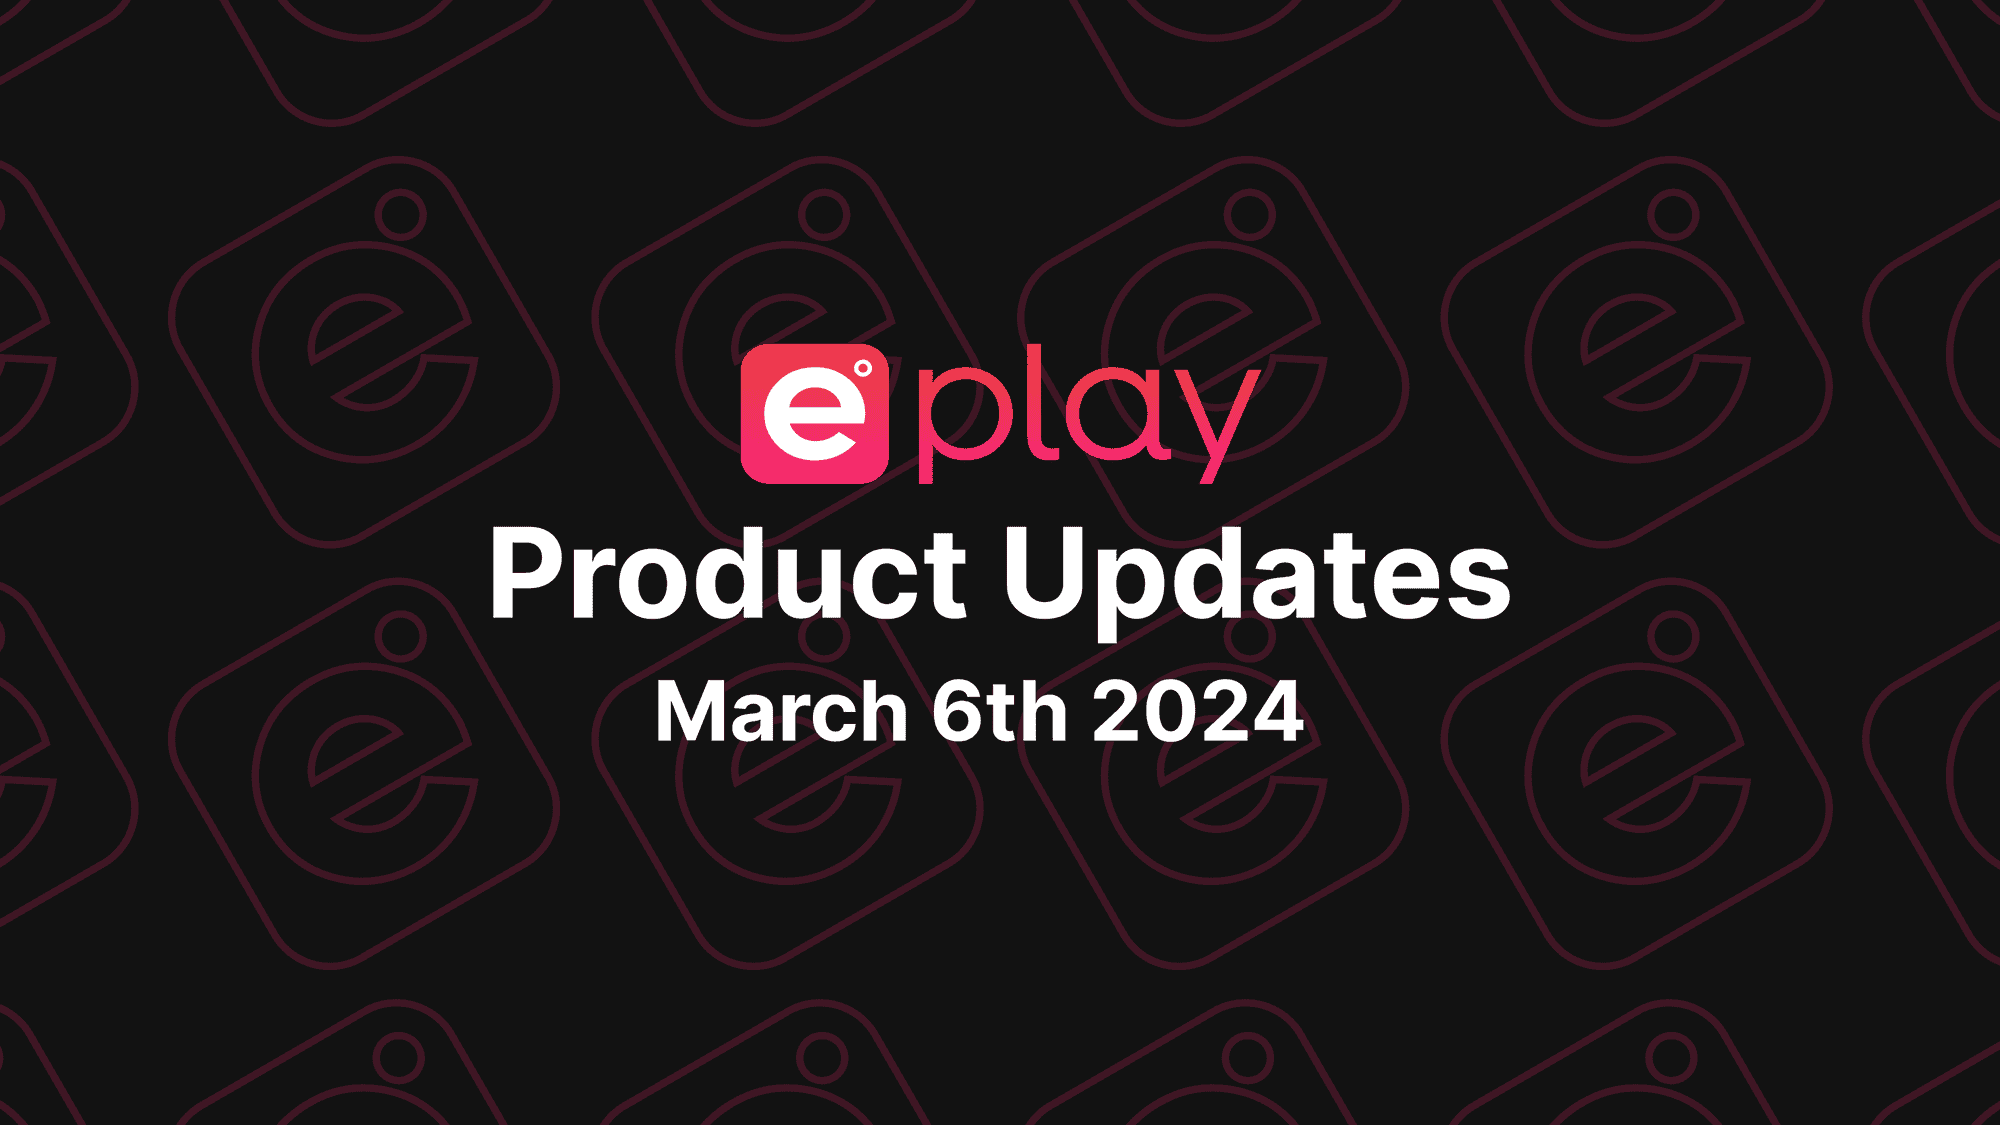 ePlay Product Updates: March 6th, 2024